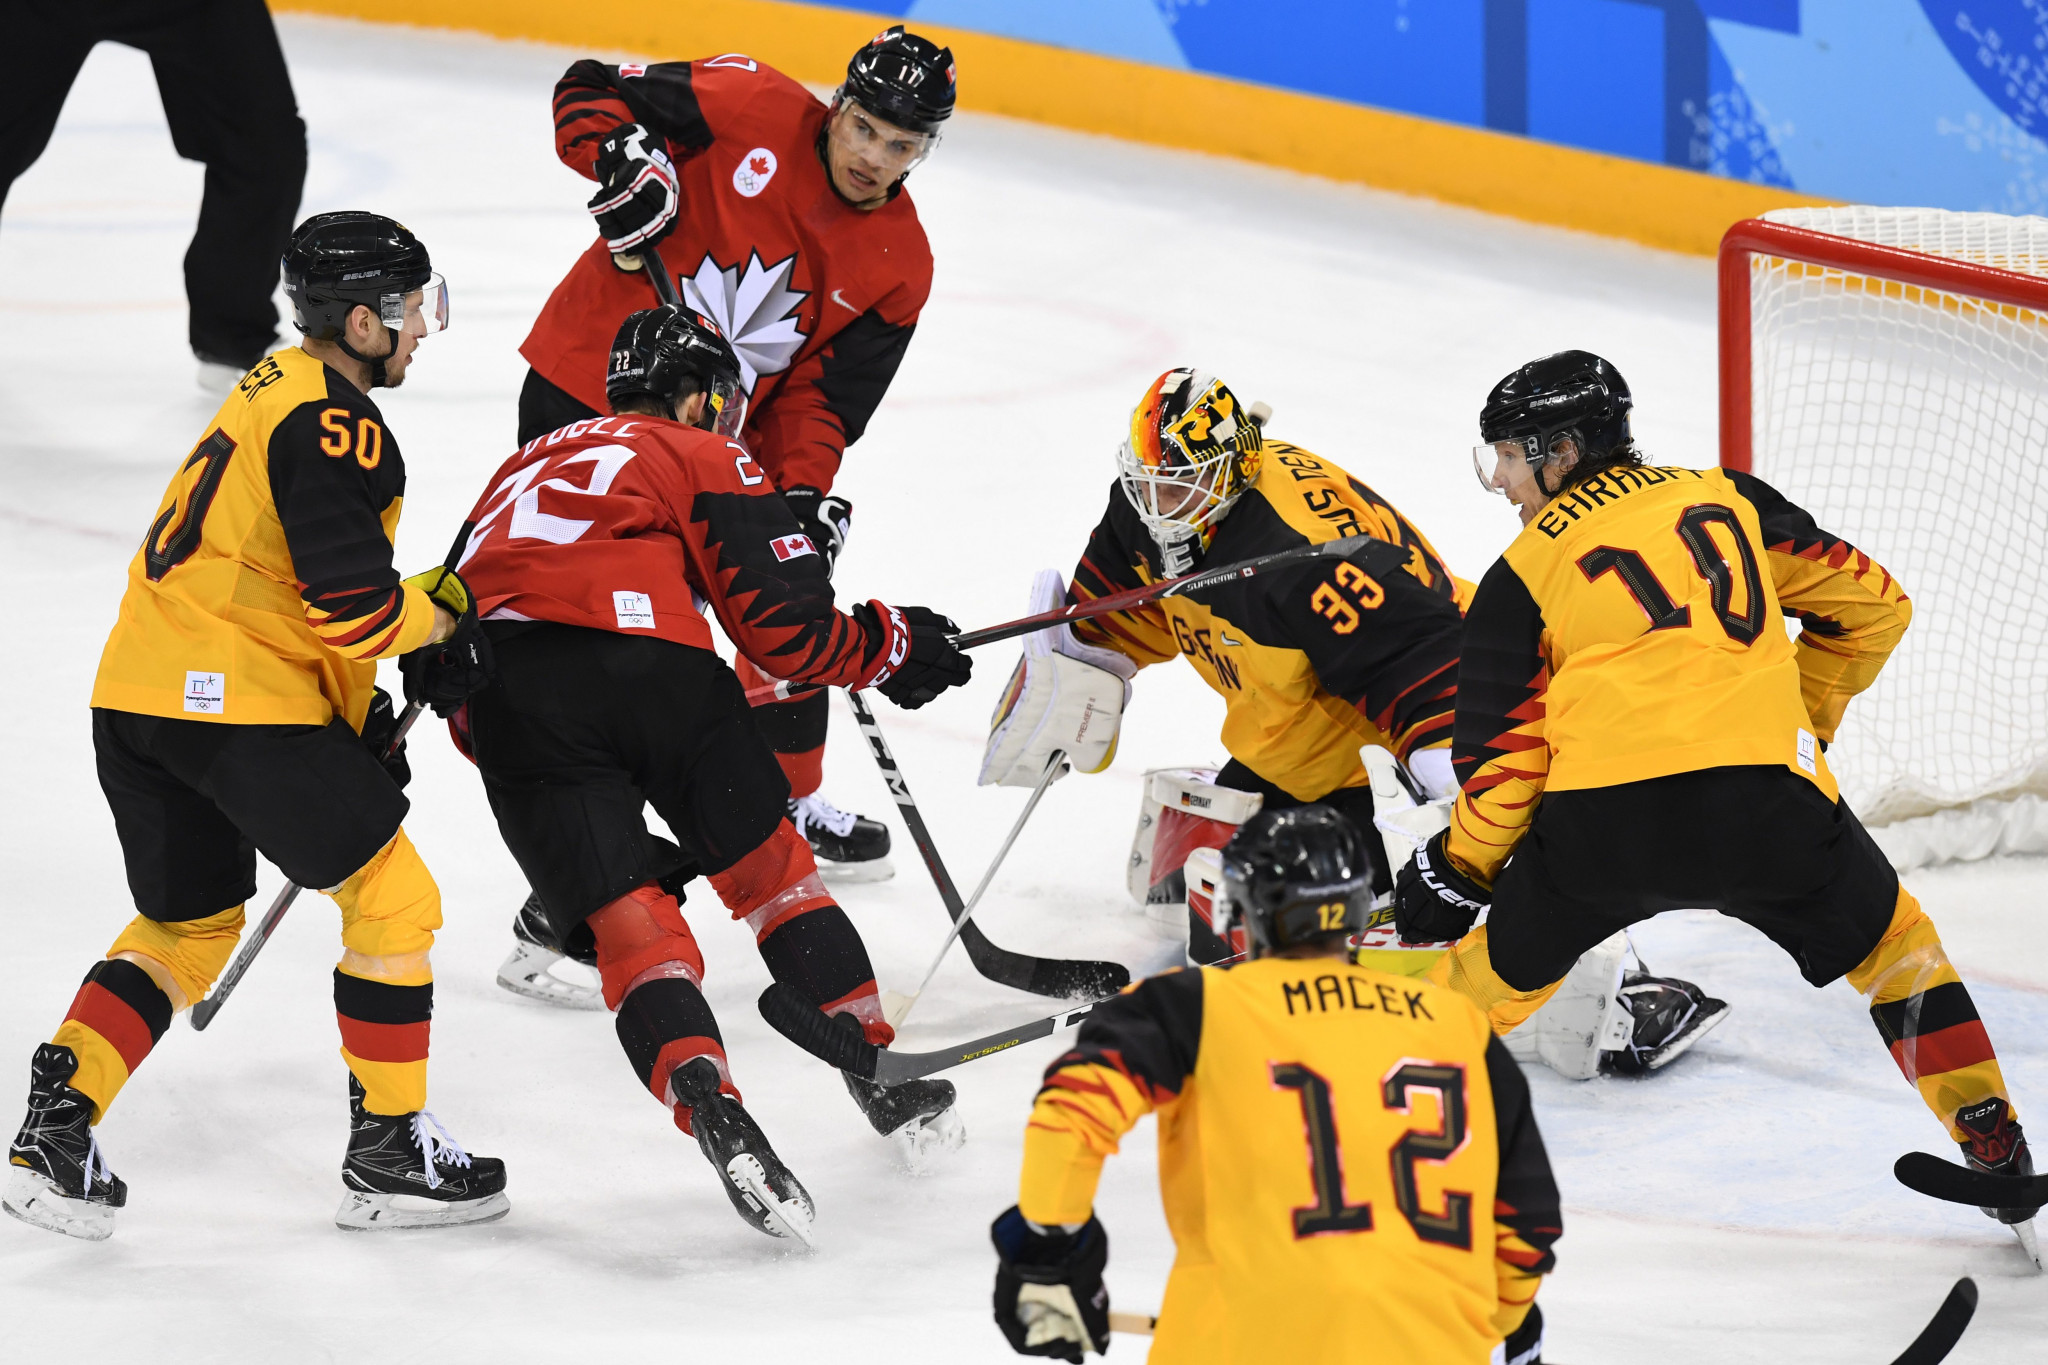 The NHL did not sanction its players to appear at the Pyeongchang 2018 Winter Olympics ©Getty Images